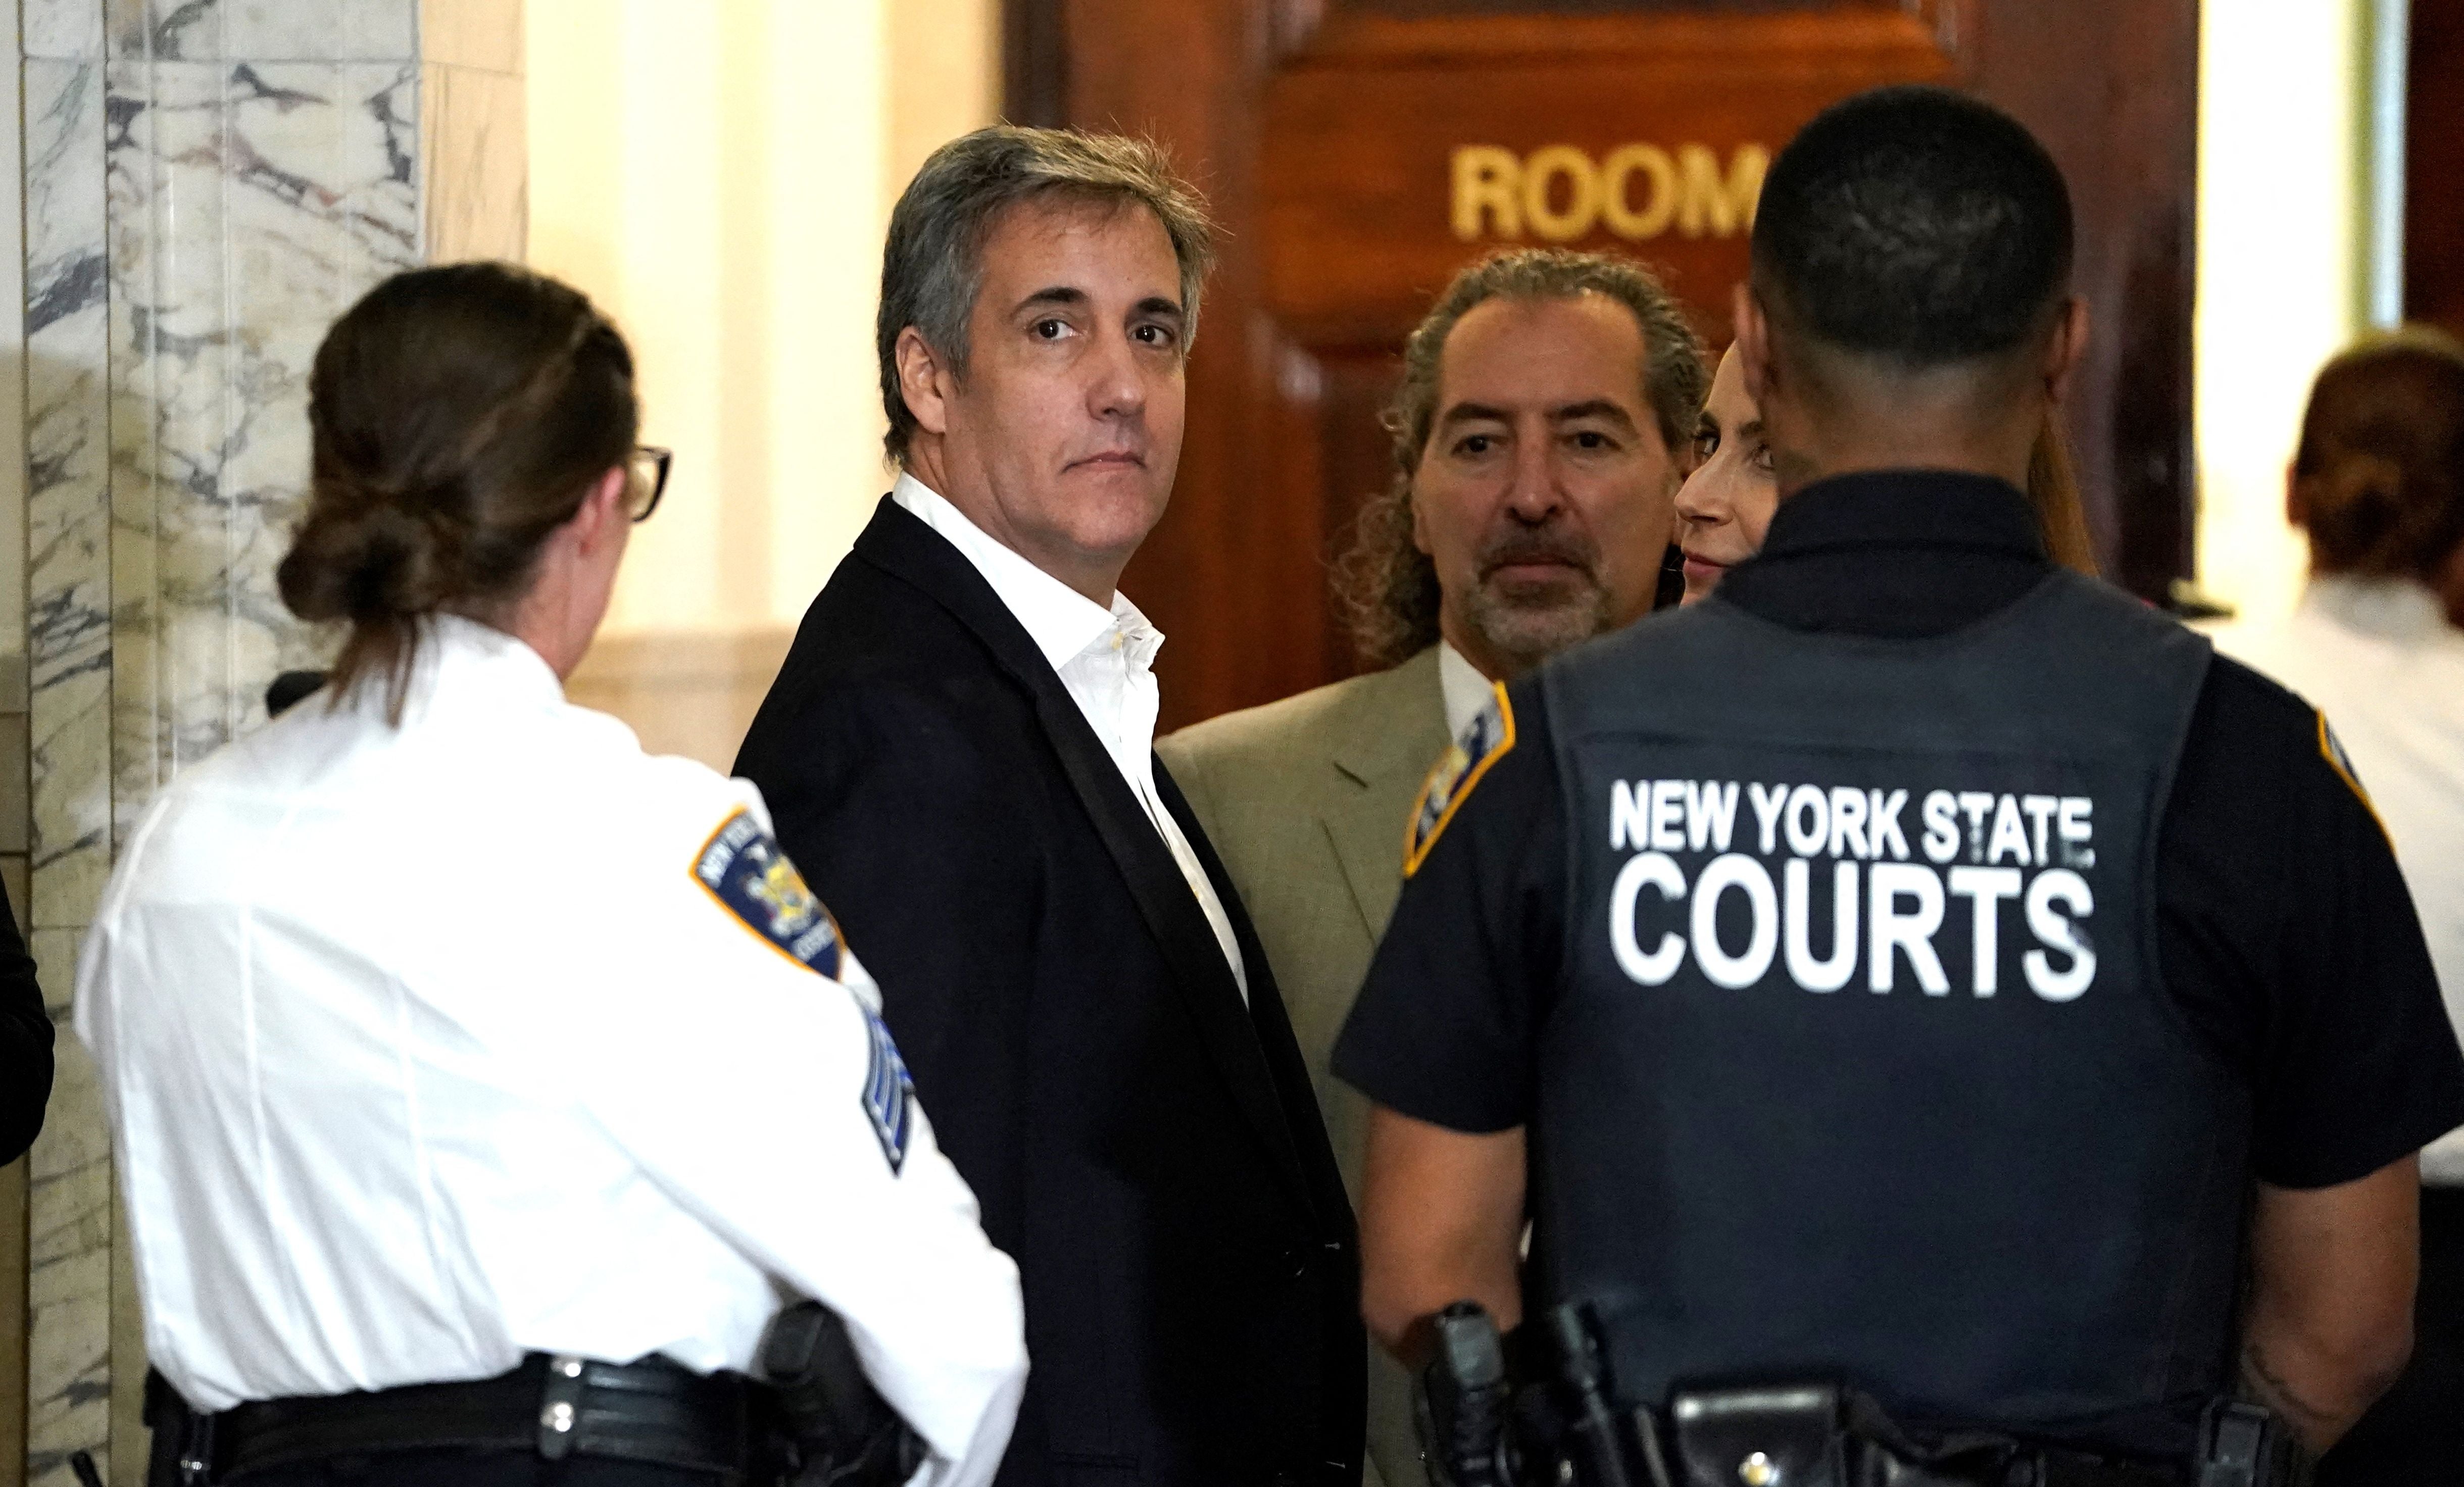 Donald Trump’s former attorney Michael Cohen at former president’s fraud trial in New York